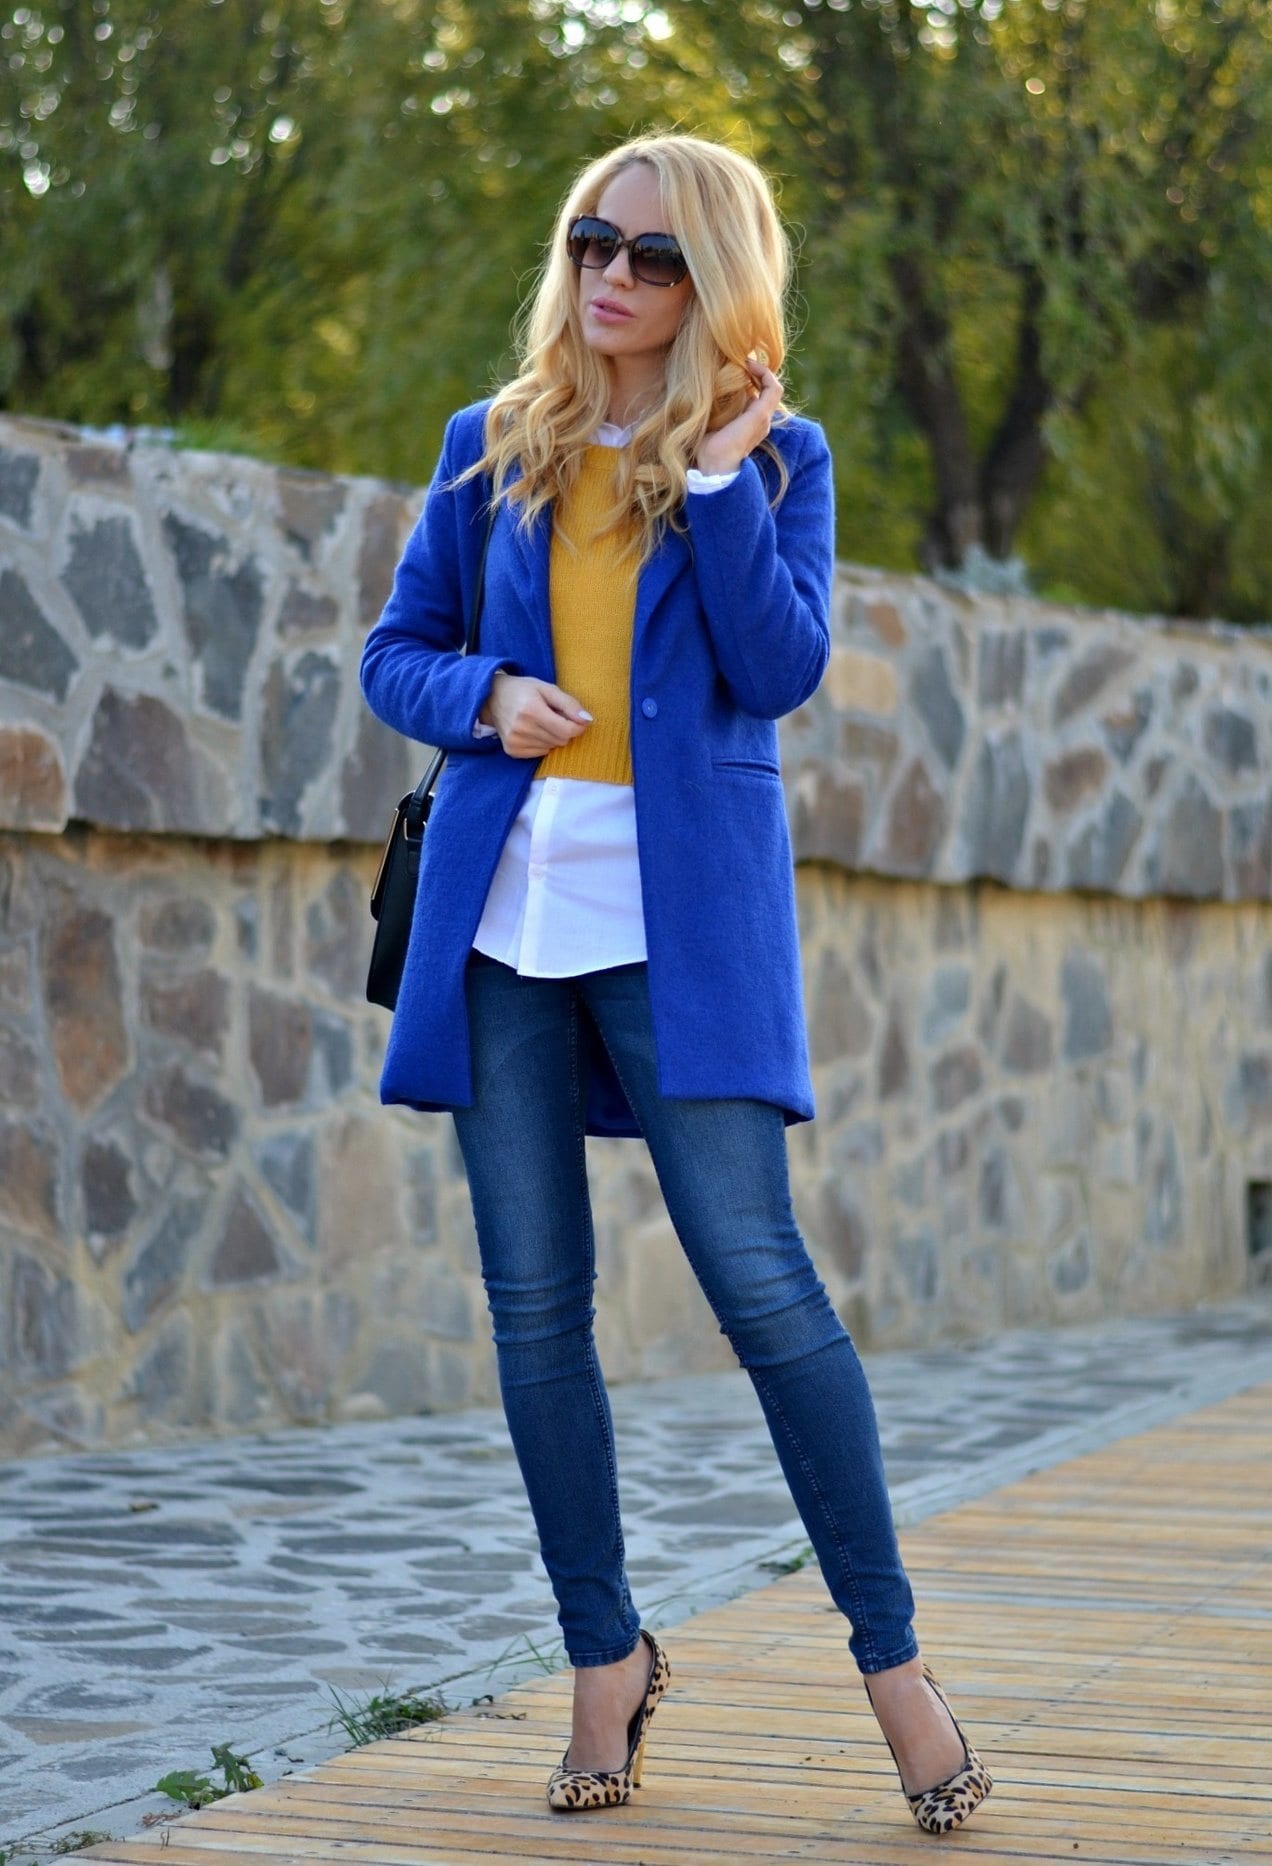 17 Winter Work Outfits For Women - Winter Business Attire's outfits for Office In The Winter